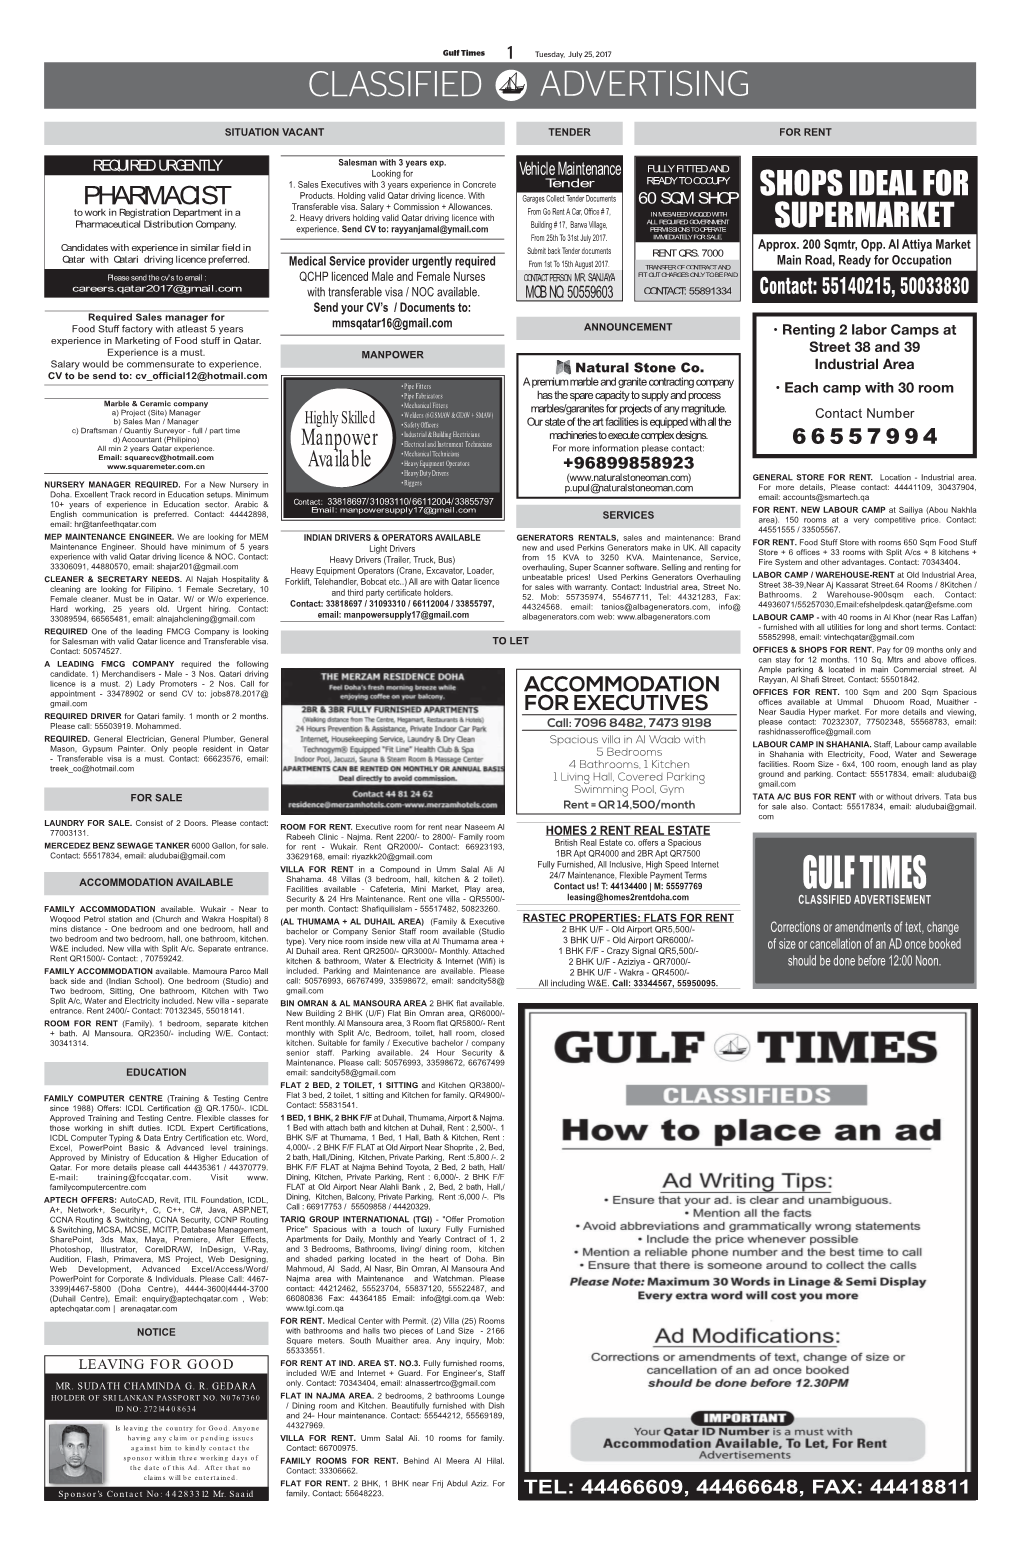 Gulf Times 1 Tuesday, July 25, 2017 CLASSIFIED ADVERTISING